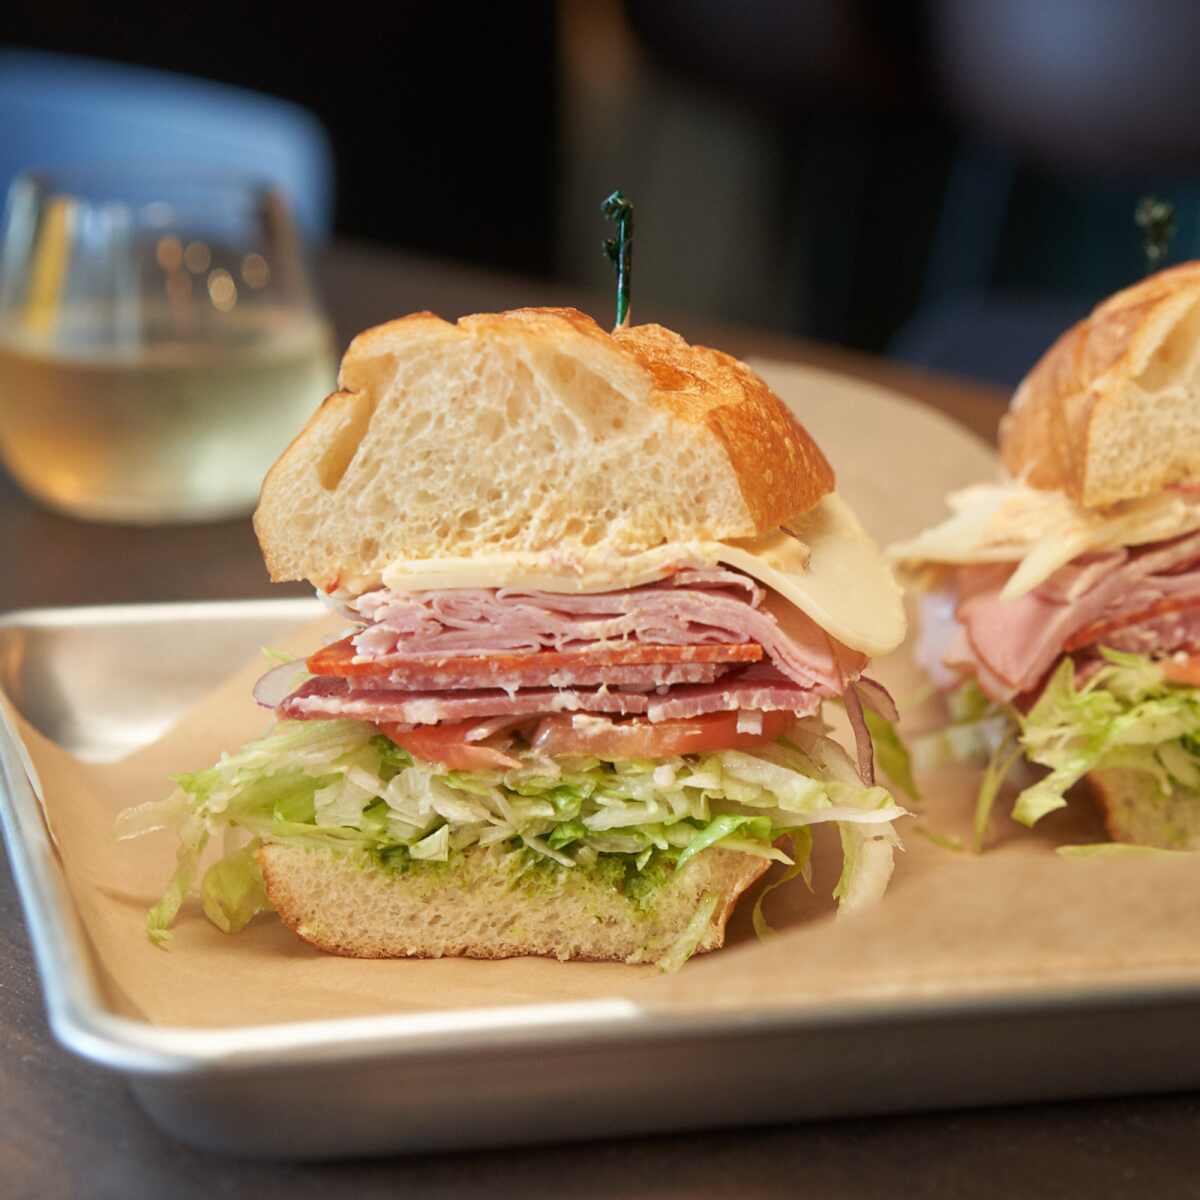 The “Our Go To Italian” sandwich at Windsor Brown's in Anaheim.